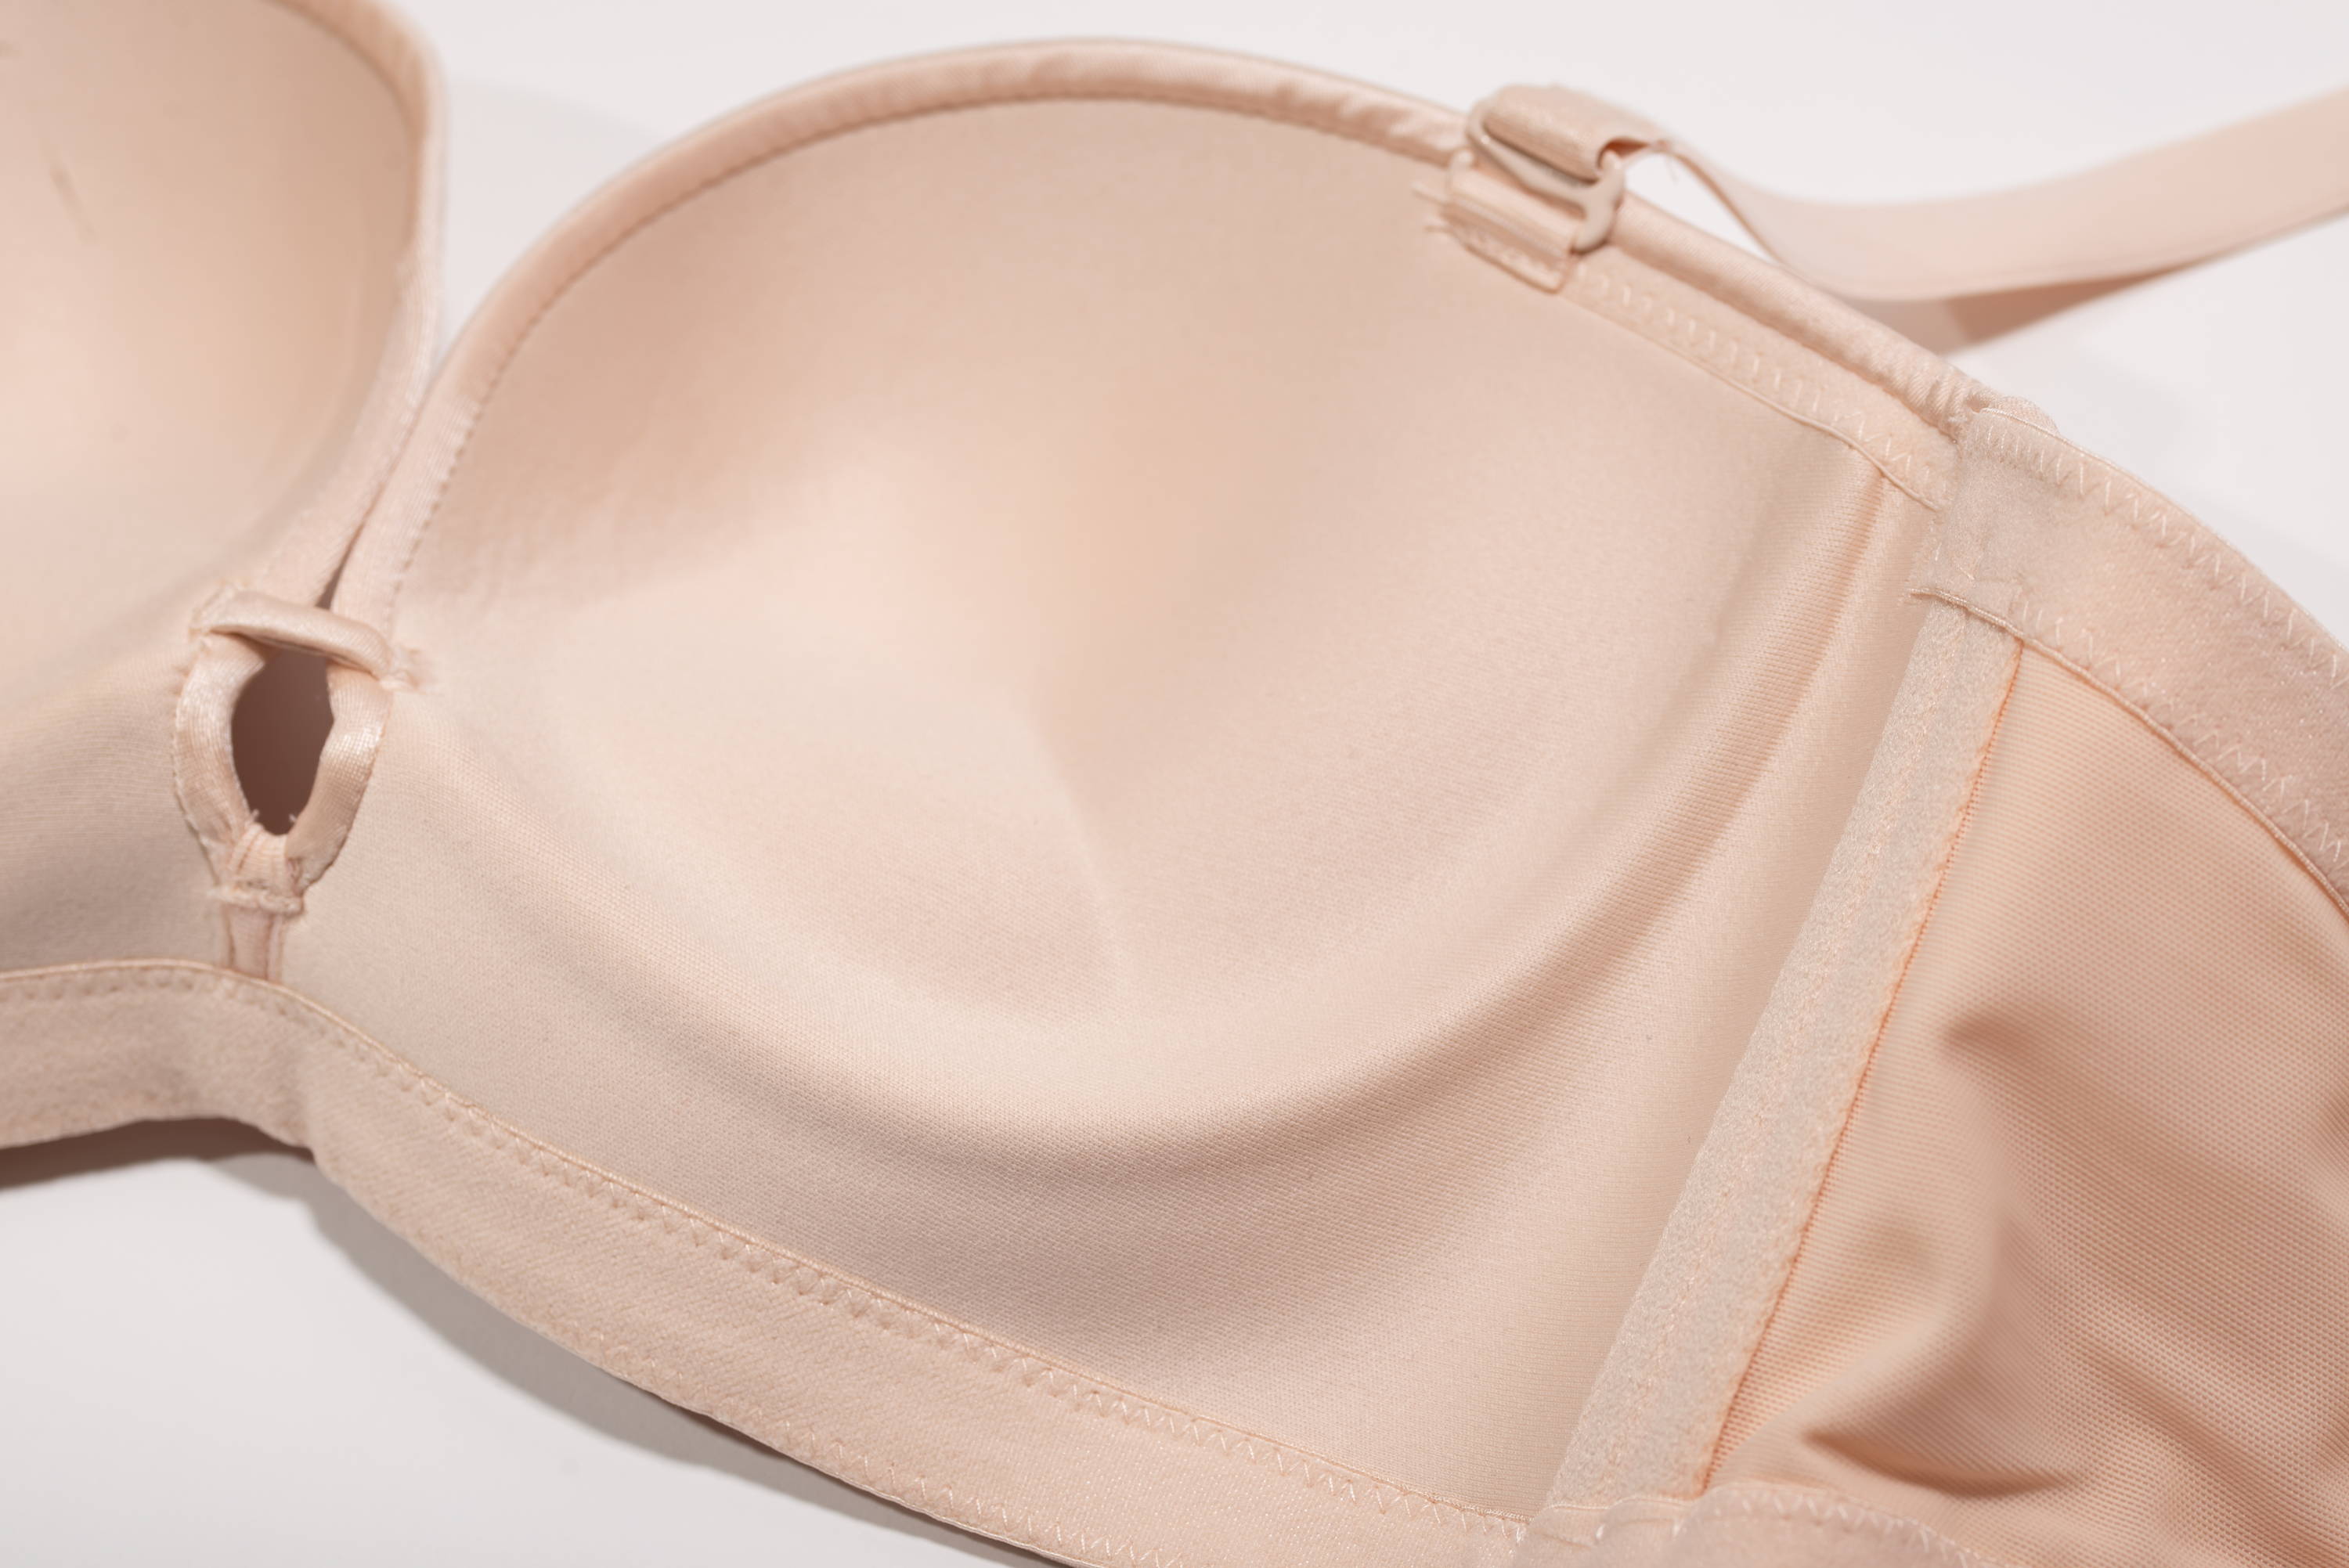 What is the Difference Between a Molded Cup Bra, A T-shirt Bra & a